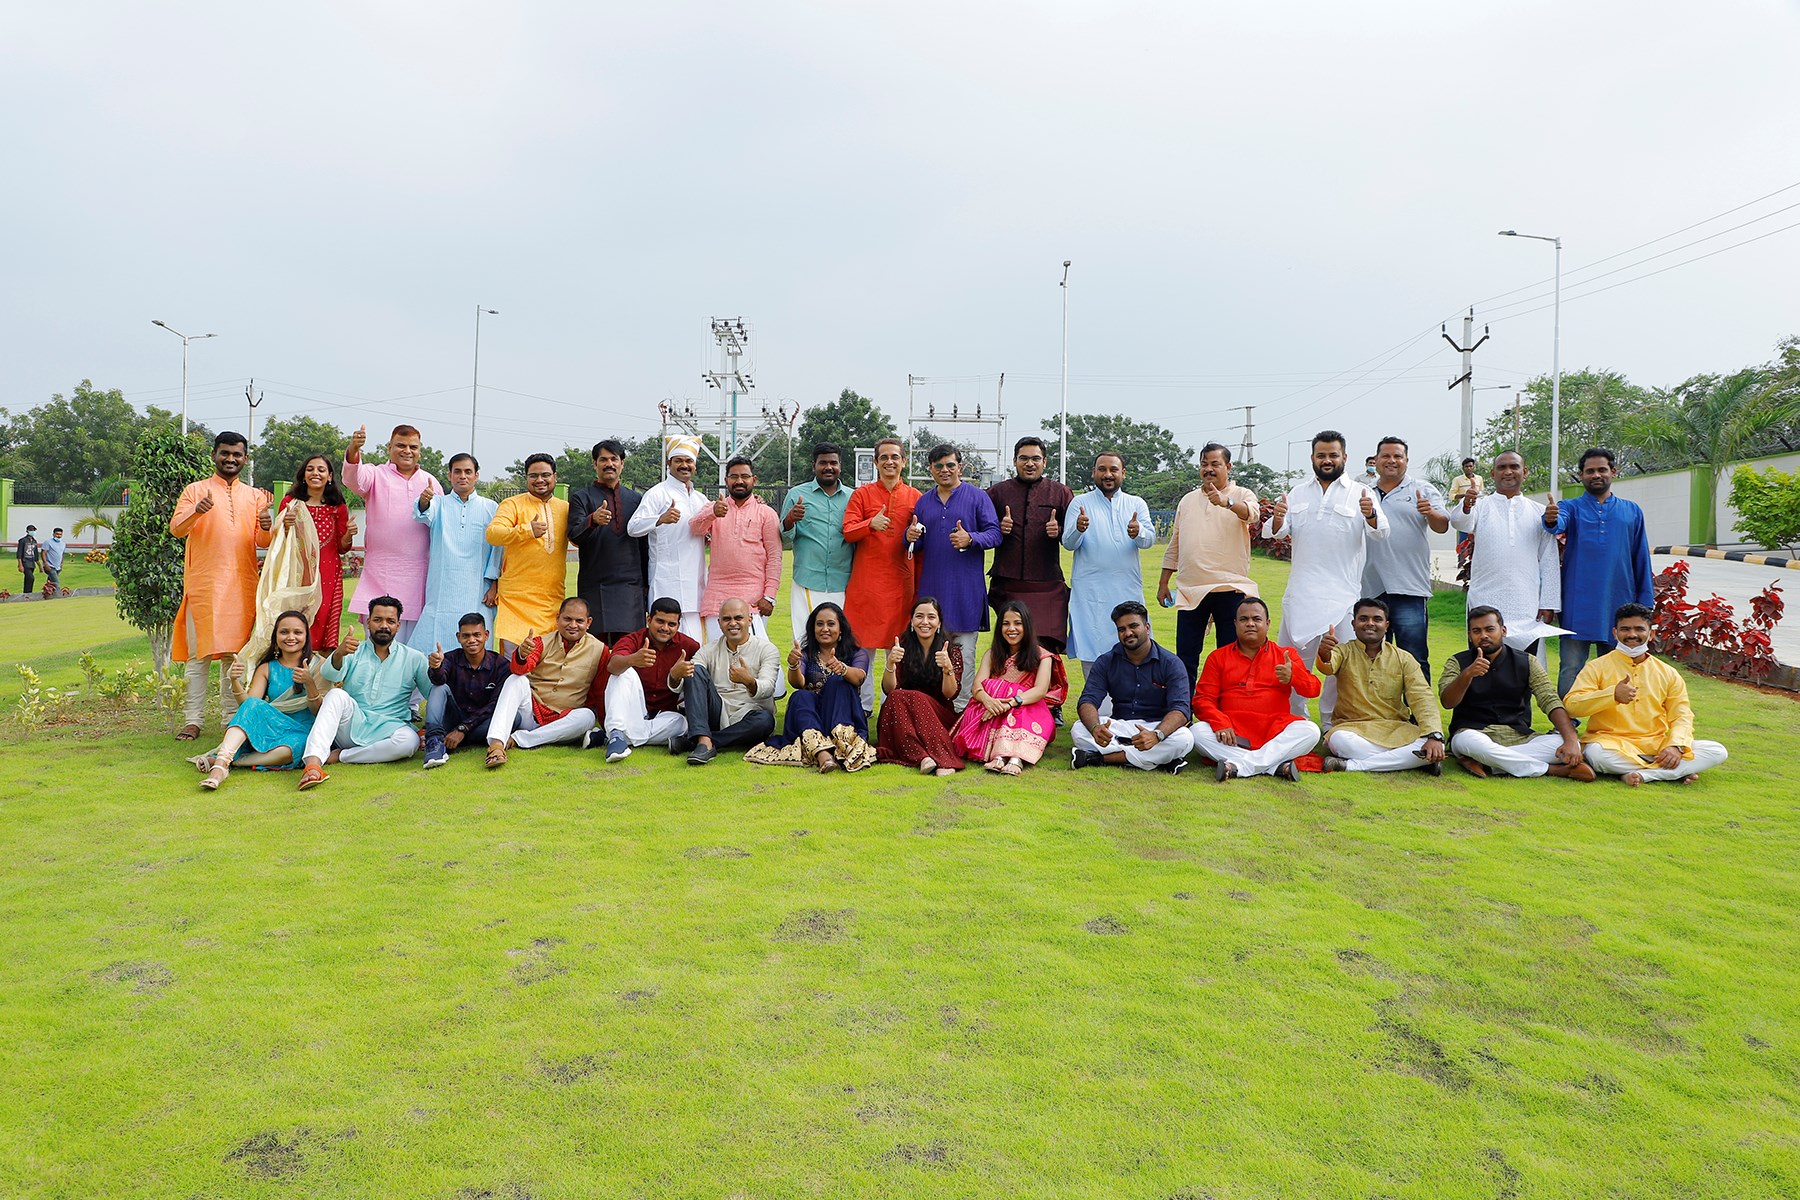 A group of people standing on a lawn in India